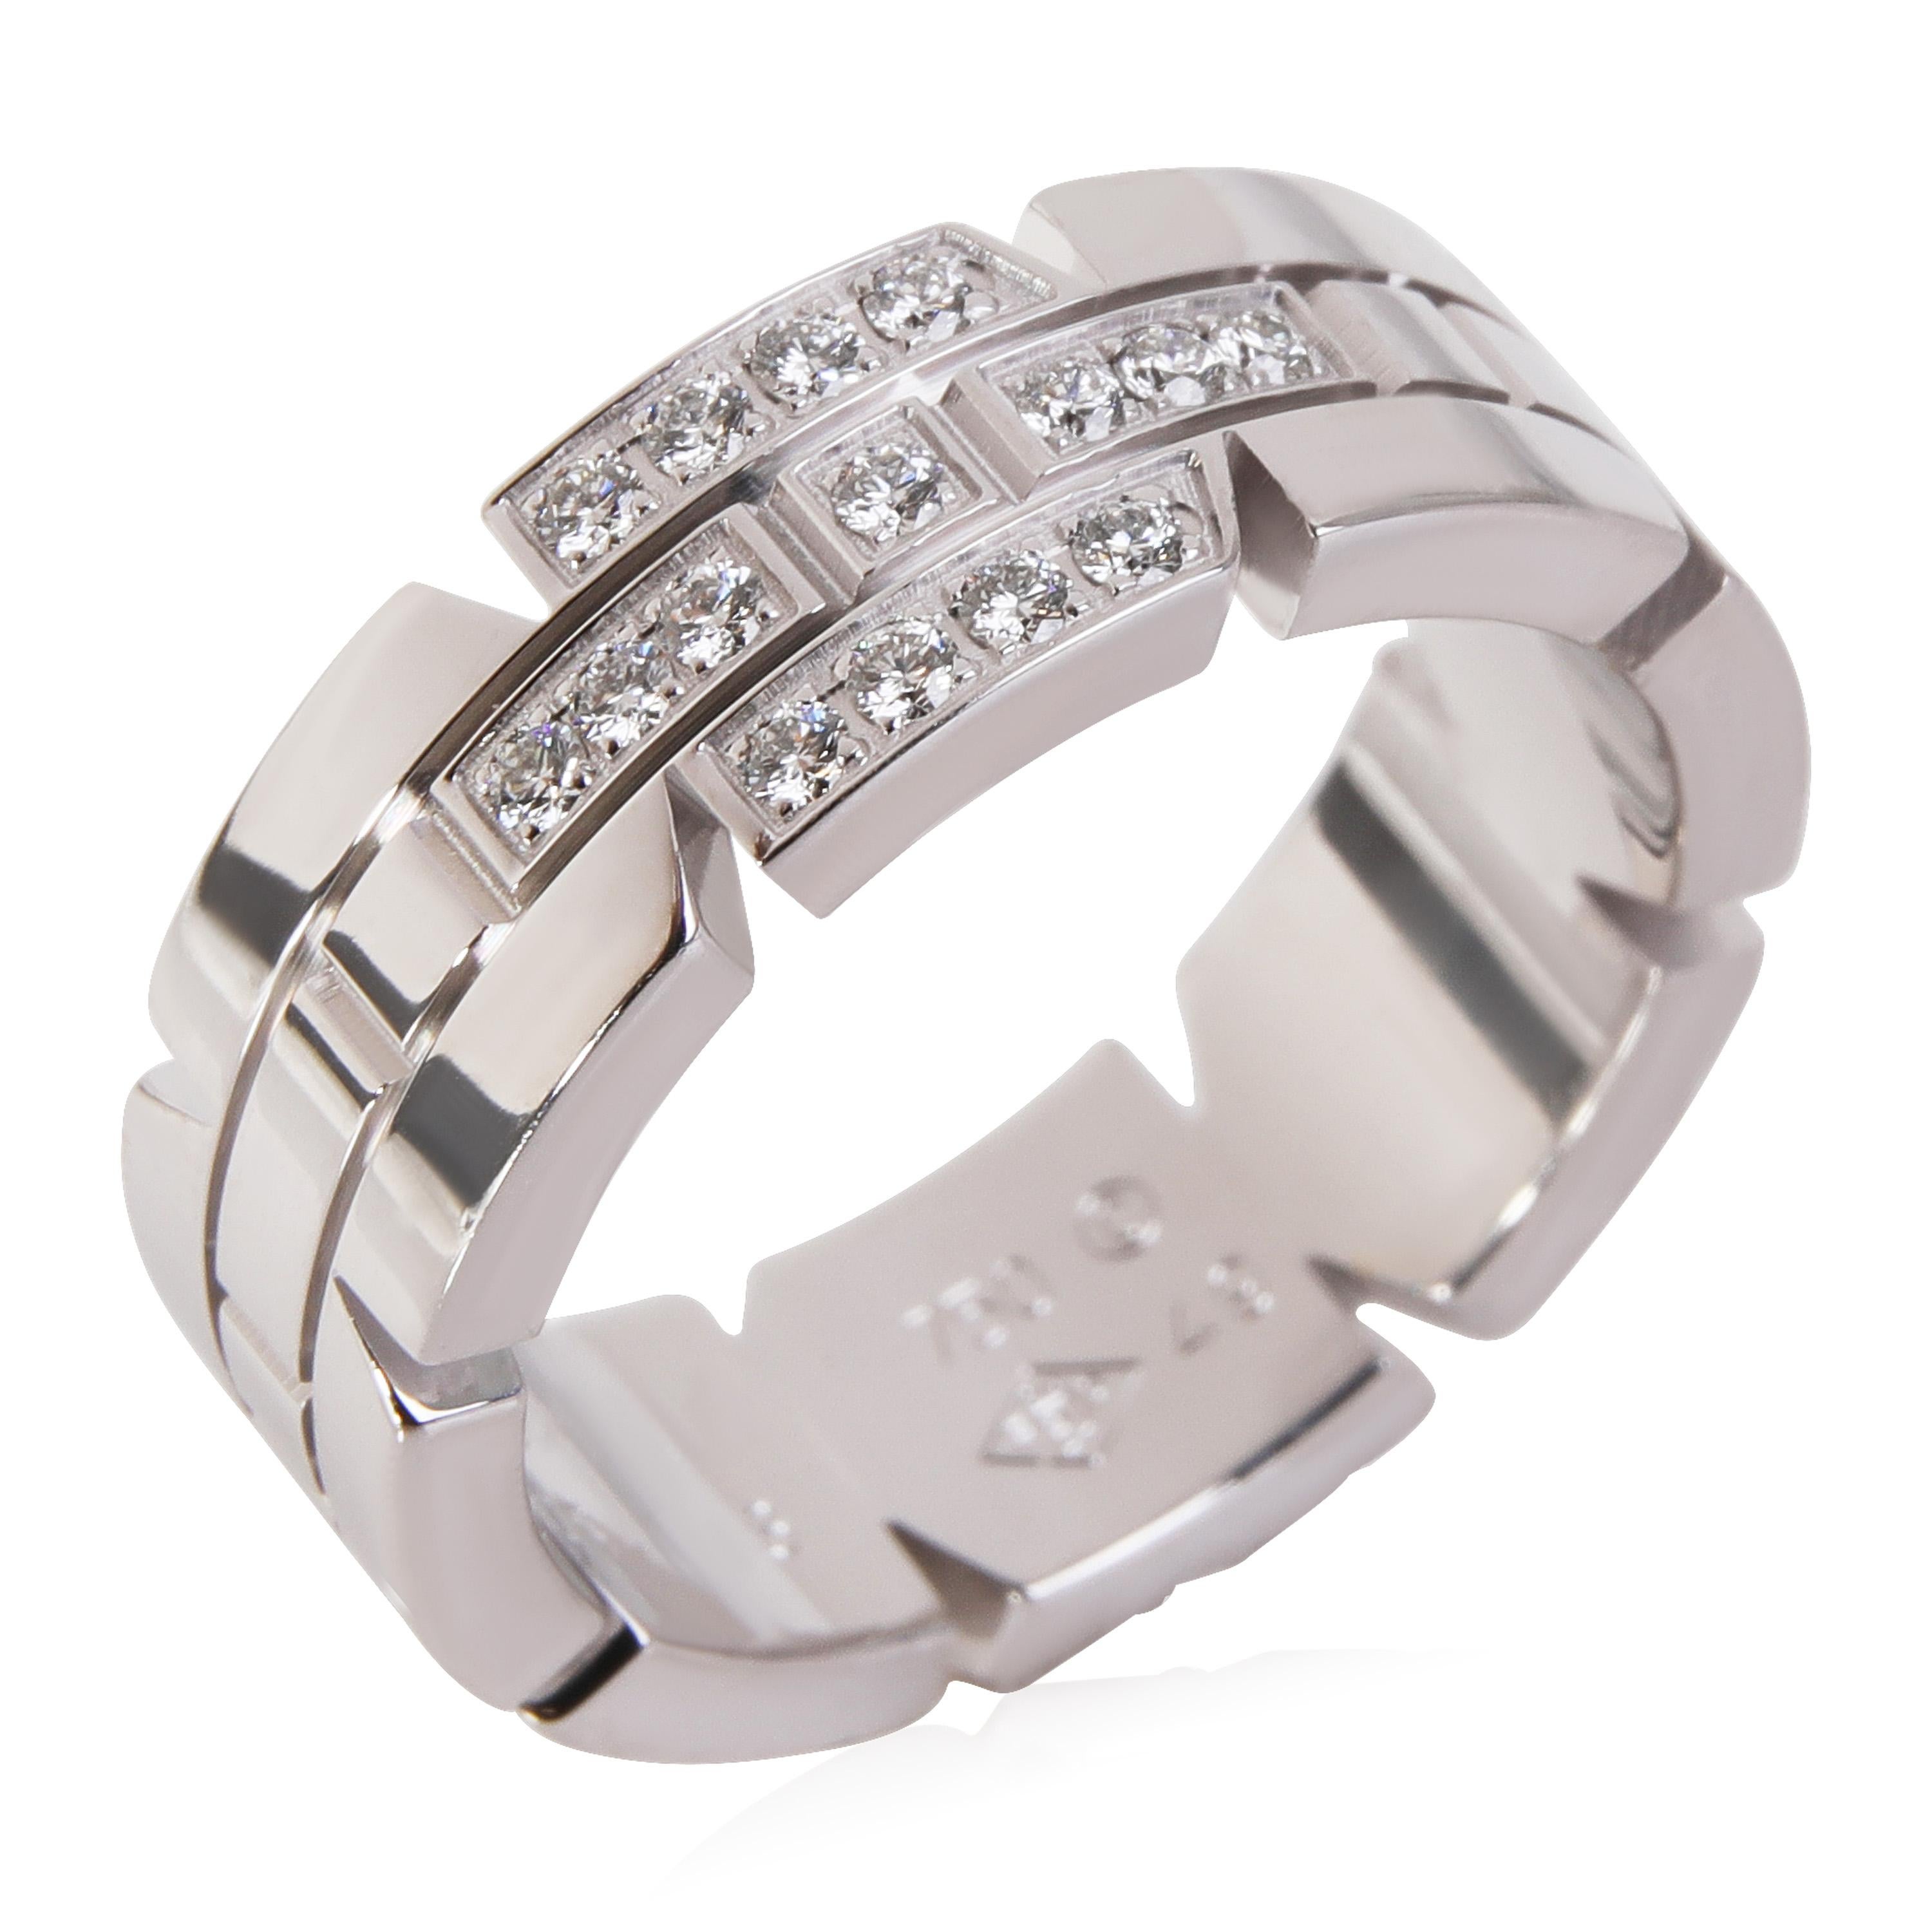 Cartier Tank Francaise Diamond Ring in 18k White Gold 0.11 CTW

PRIMARY DETAILS
SKU: 120240
Listing Title: Cartier Tank Francaise Diamond Ring in 18k White Gold 0.11 CTW
Condition Description: Retails for 3800 USD. In excellent condition and